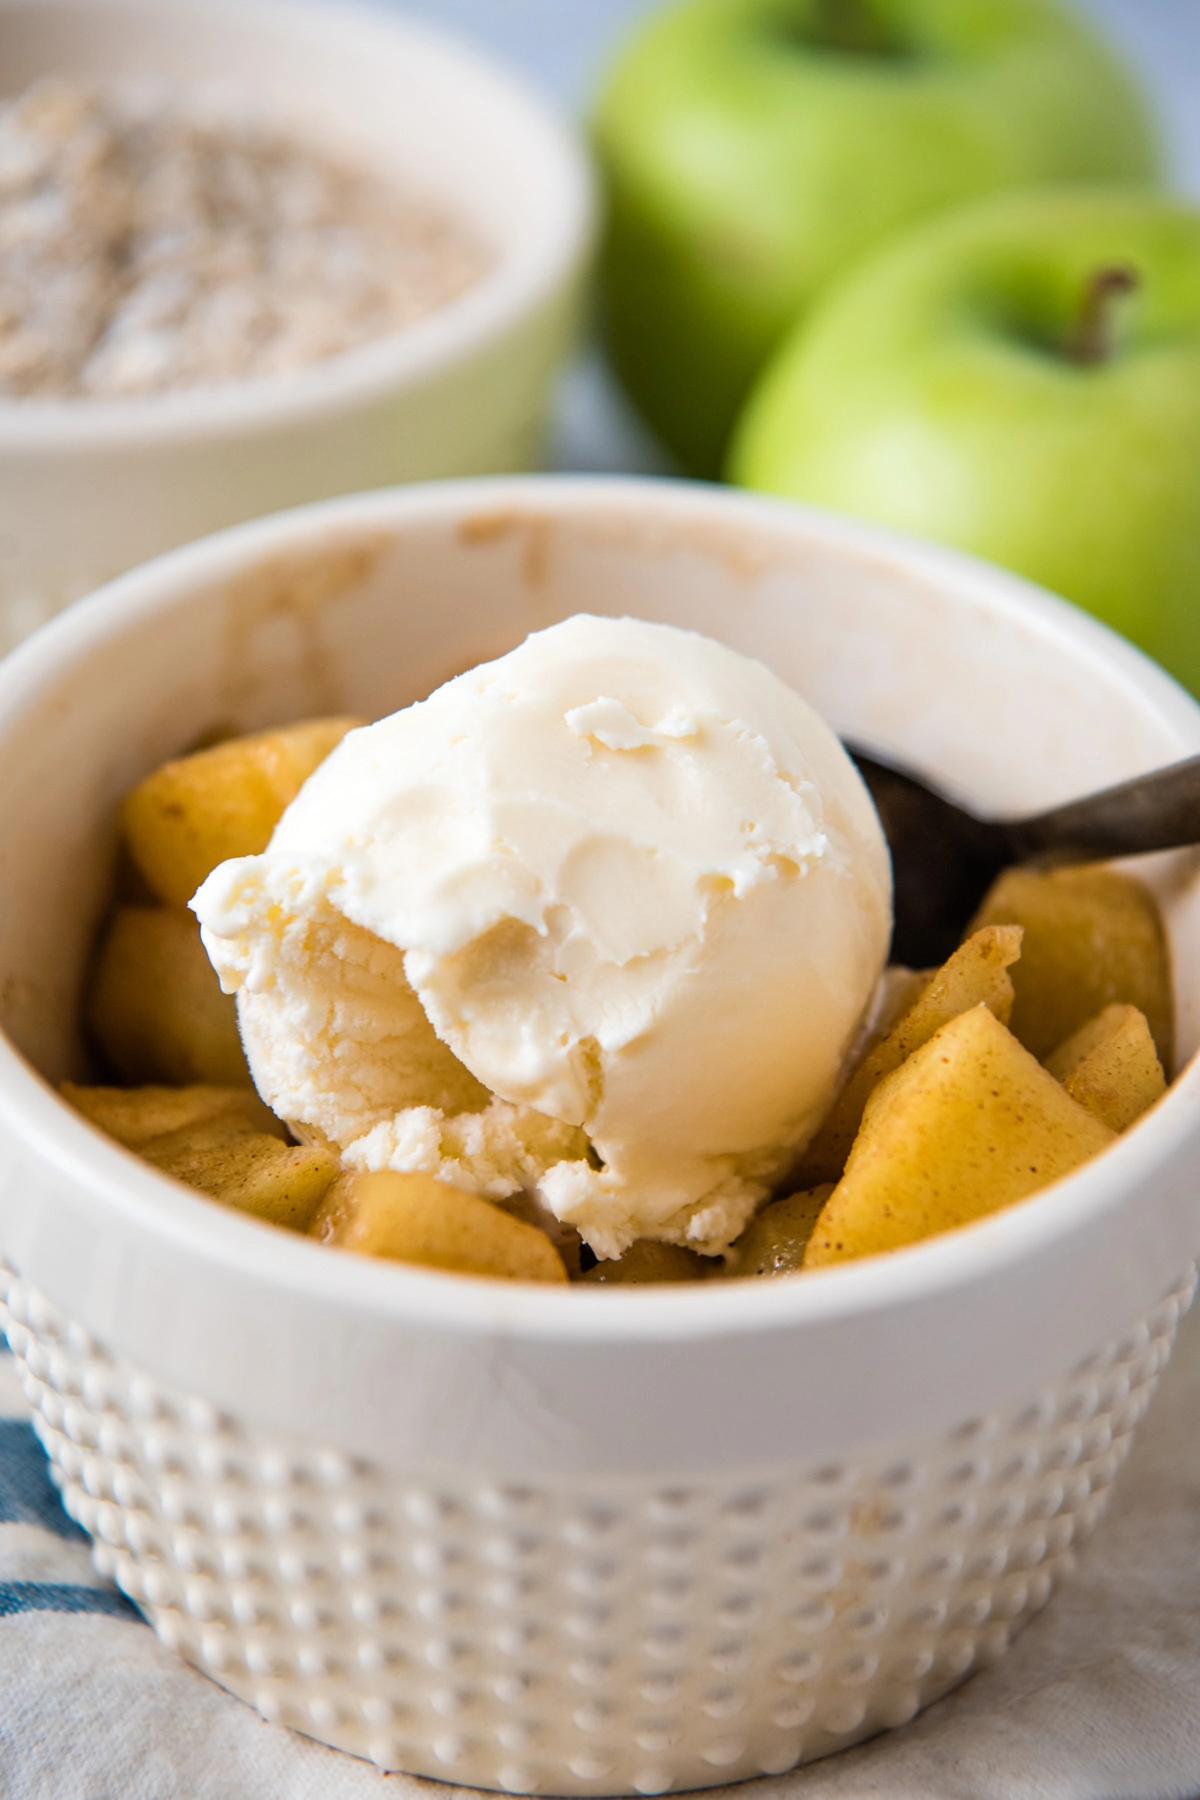 ivory ramekin full of microwave apples and cinnamon, topped with scoop of vanilla ice cream